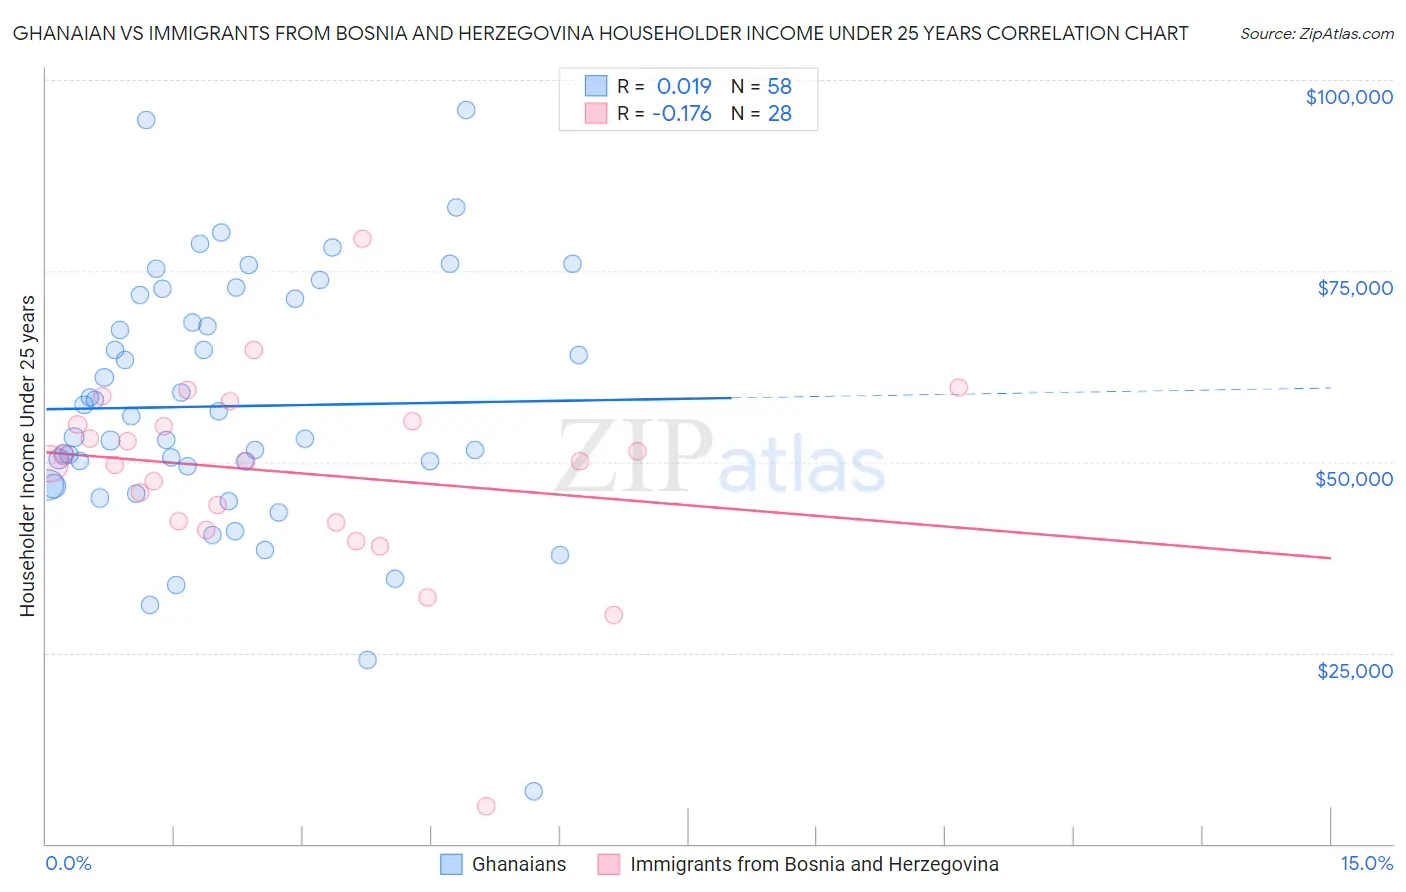 Ghanaian vs Immigrants from Bosnia and Herzegovina Householder Income Under 25 years